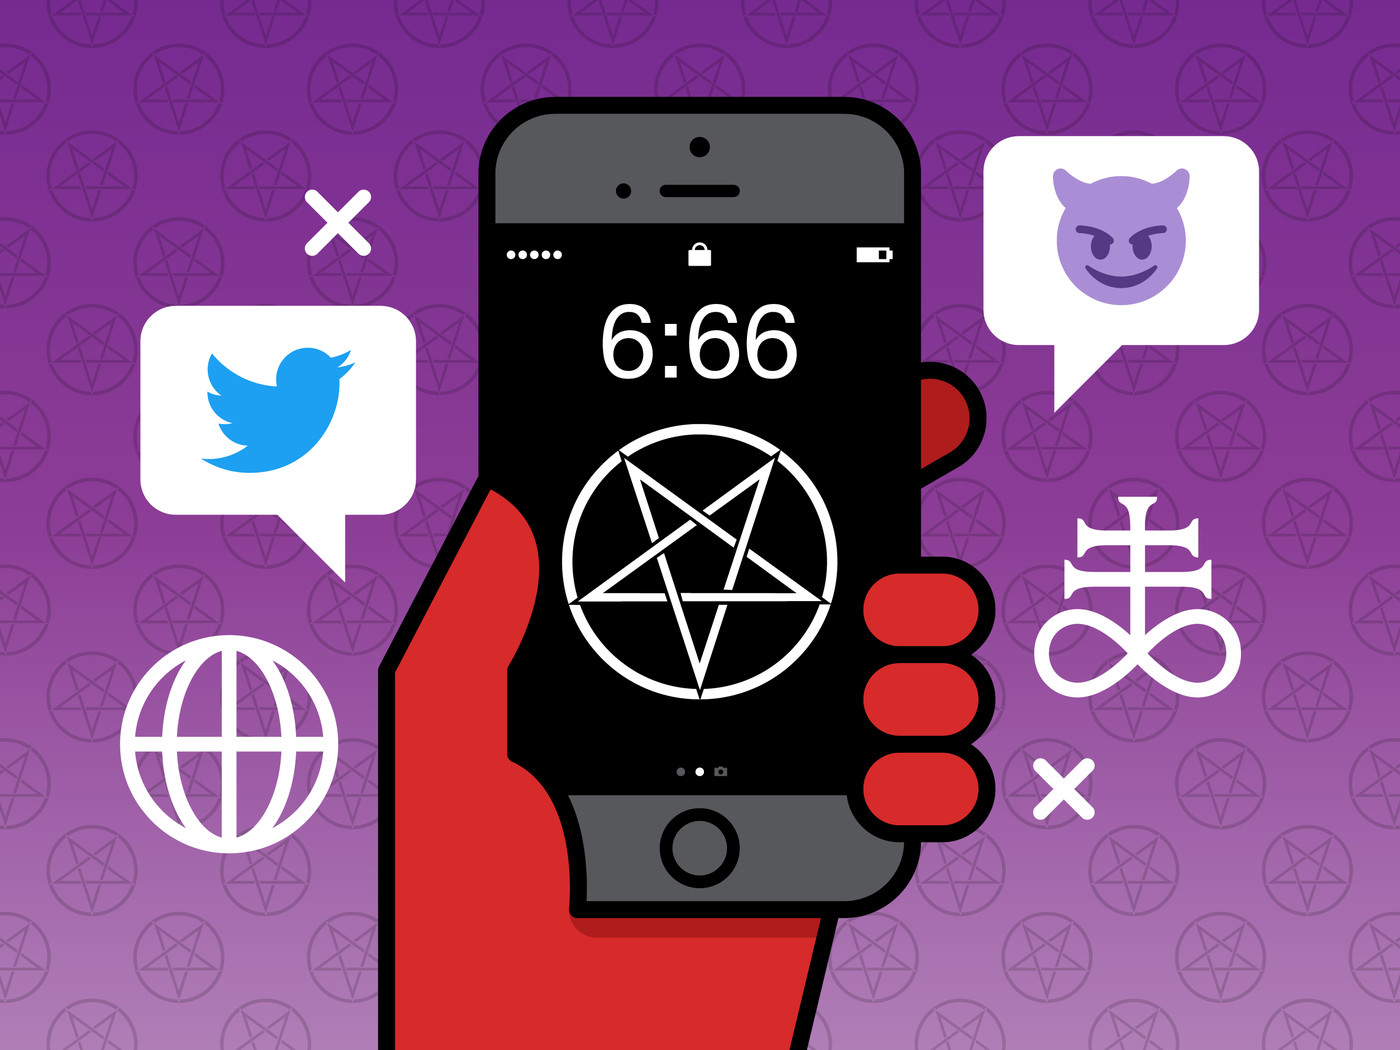 How the Church of Satan Mastered Twitter - The Ringer